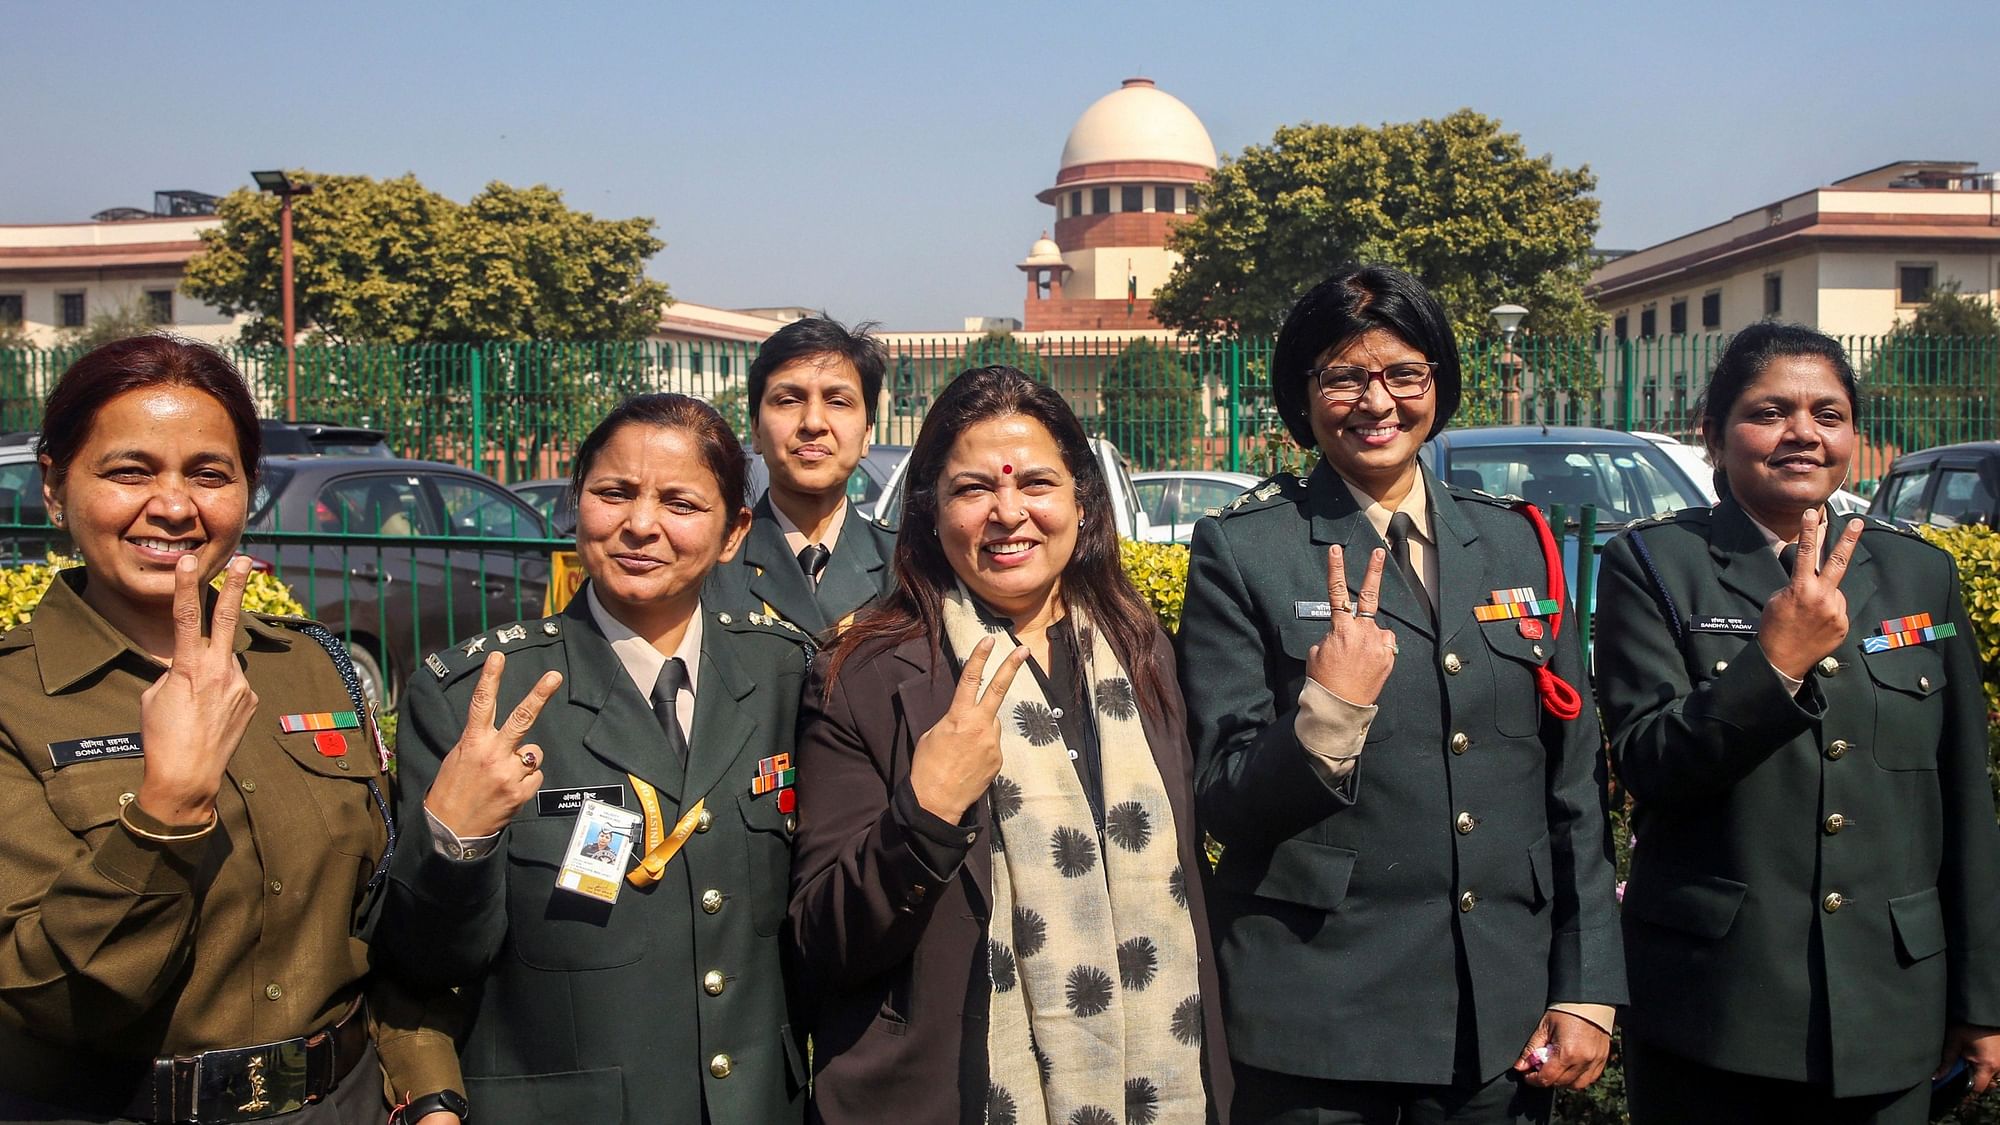 Women officers with advocate Meenakshi Lekhi outside the Supreme Court after the verdict.